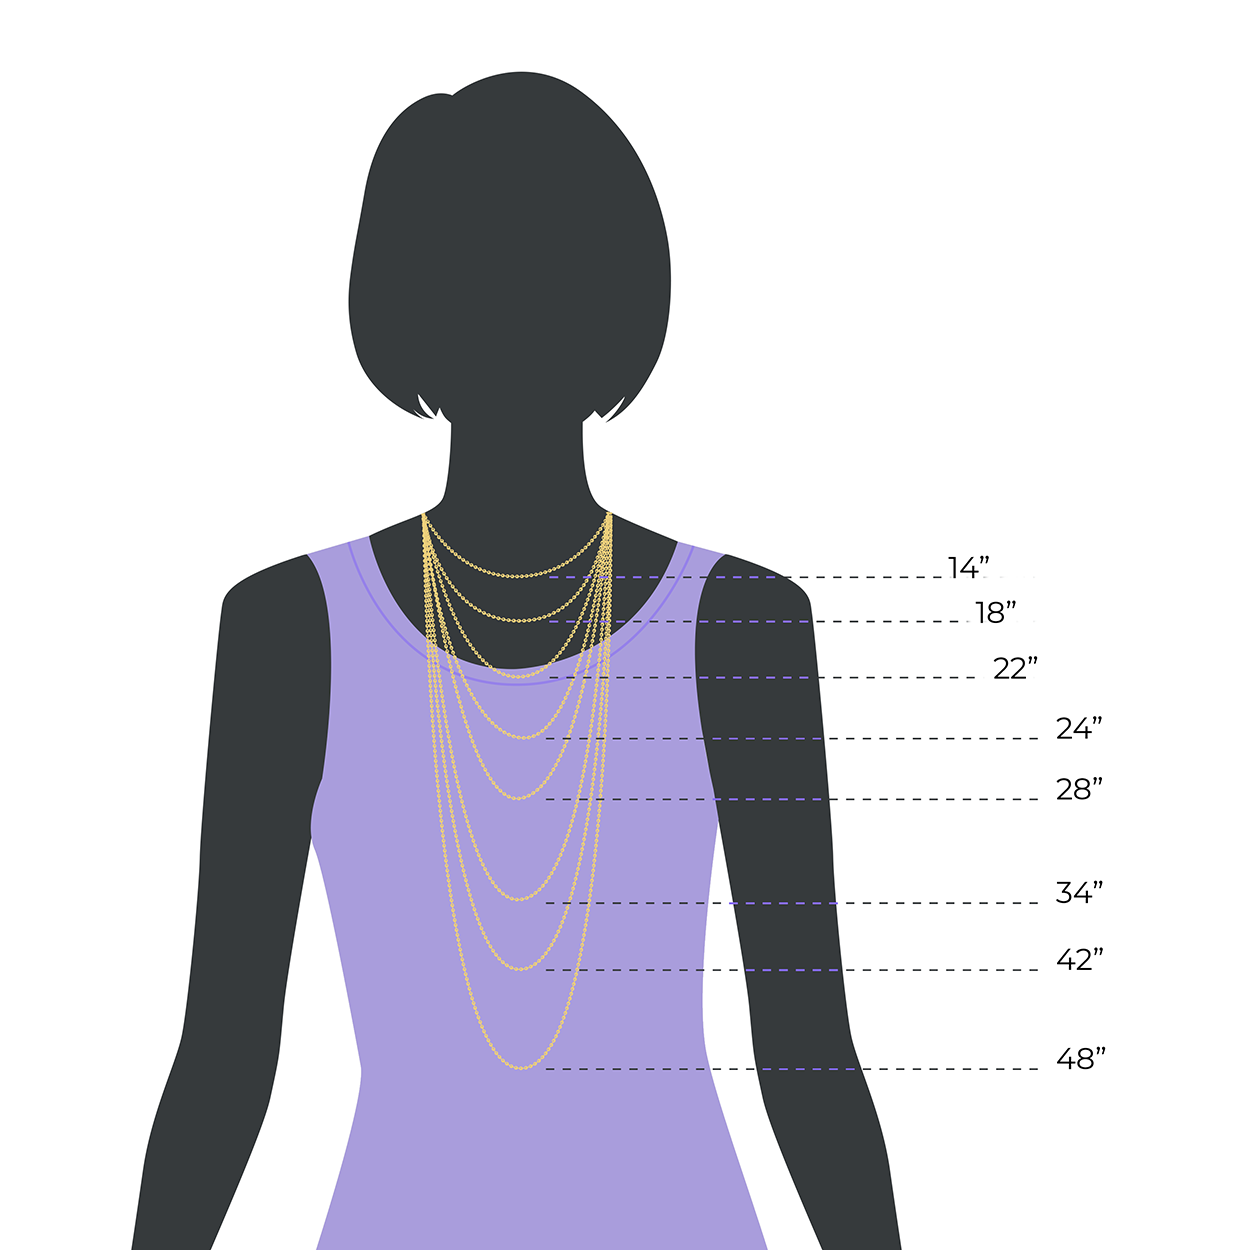 Chain Length Guide with Female Silhouette